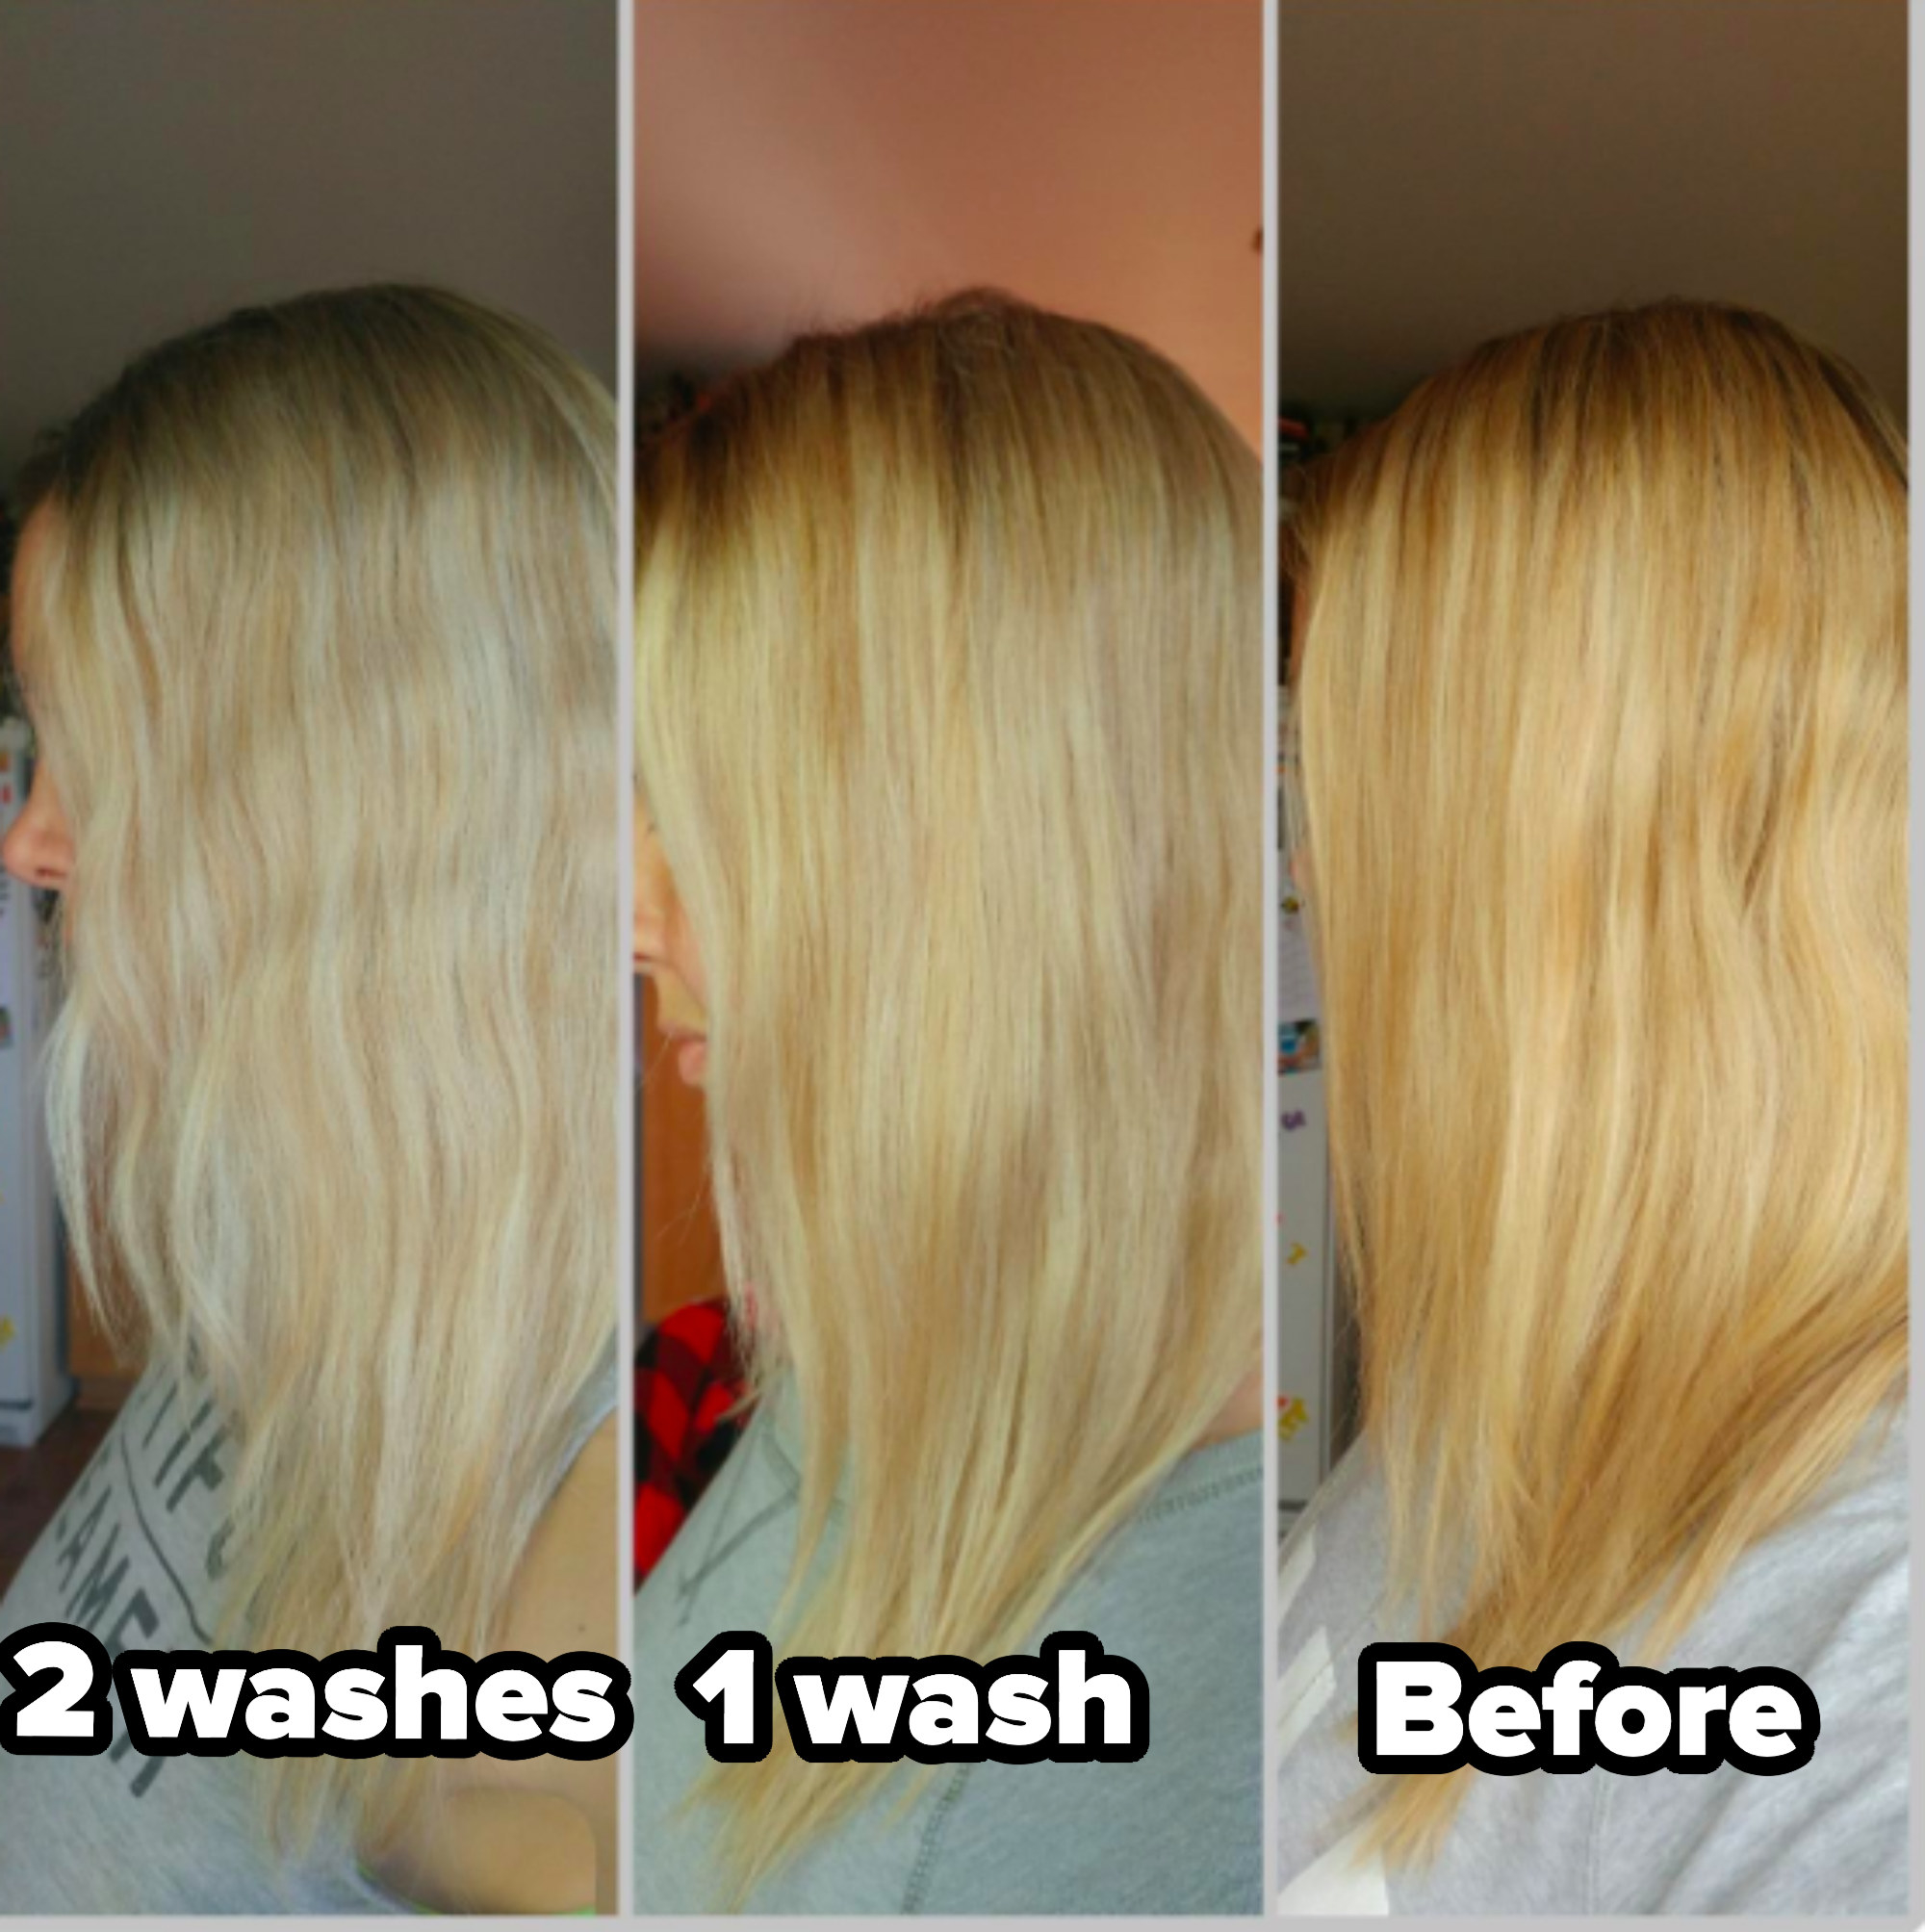 From right to left: A reviewer&#x27;s hair looking very yellow (before), their hair lighter (1 wash), and finally their hair looking more platinum blonde (2 washes)